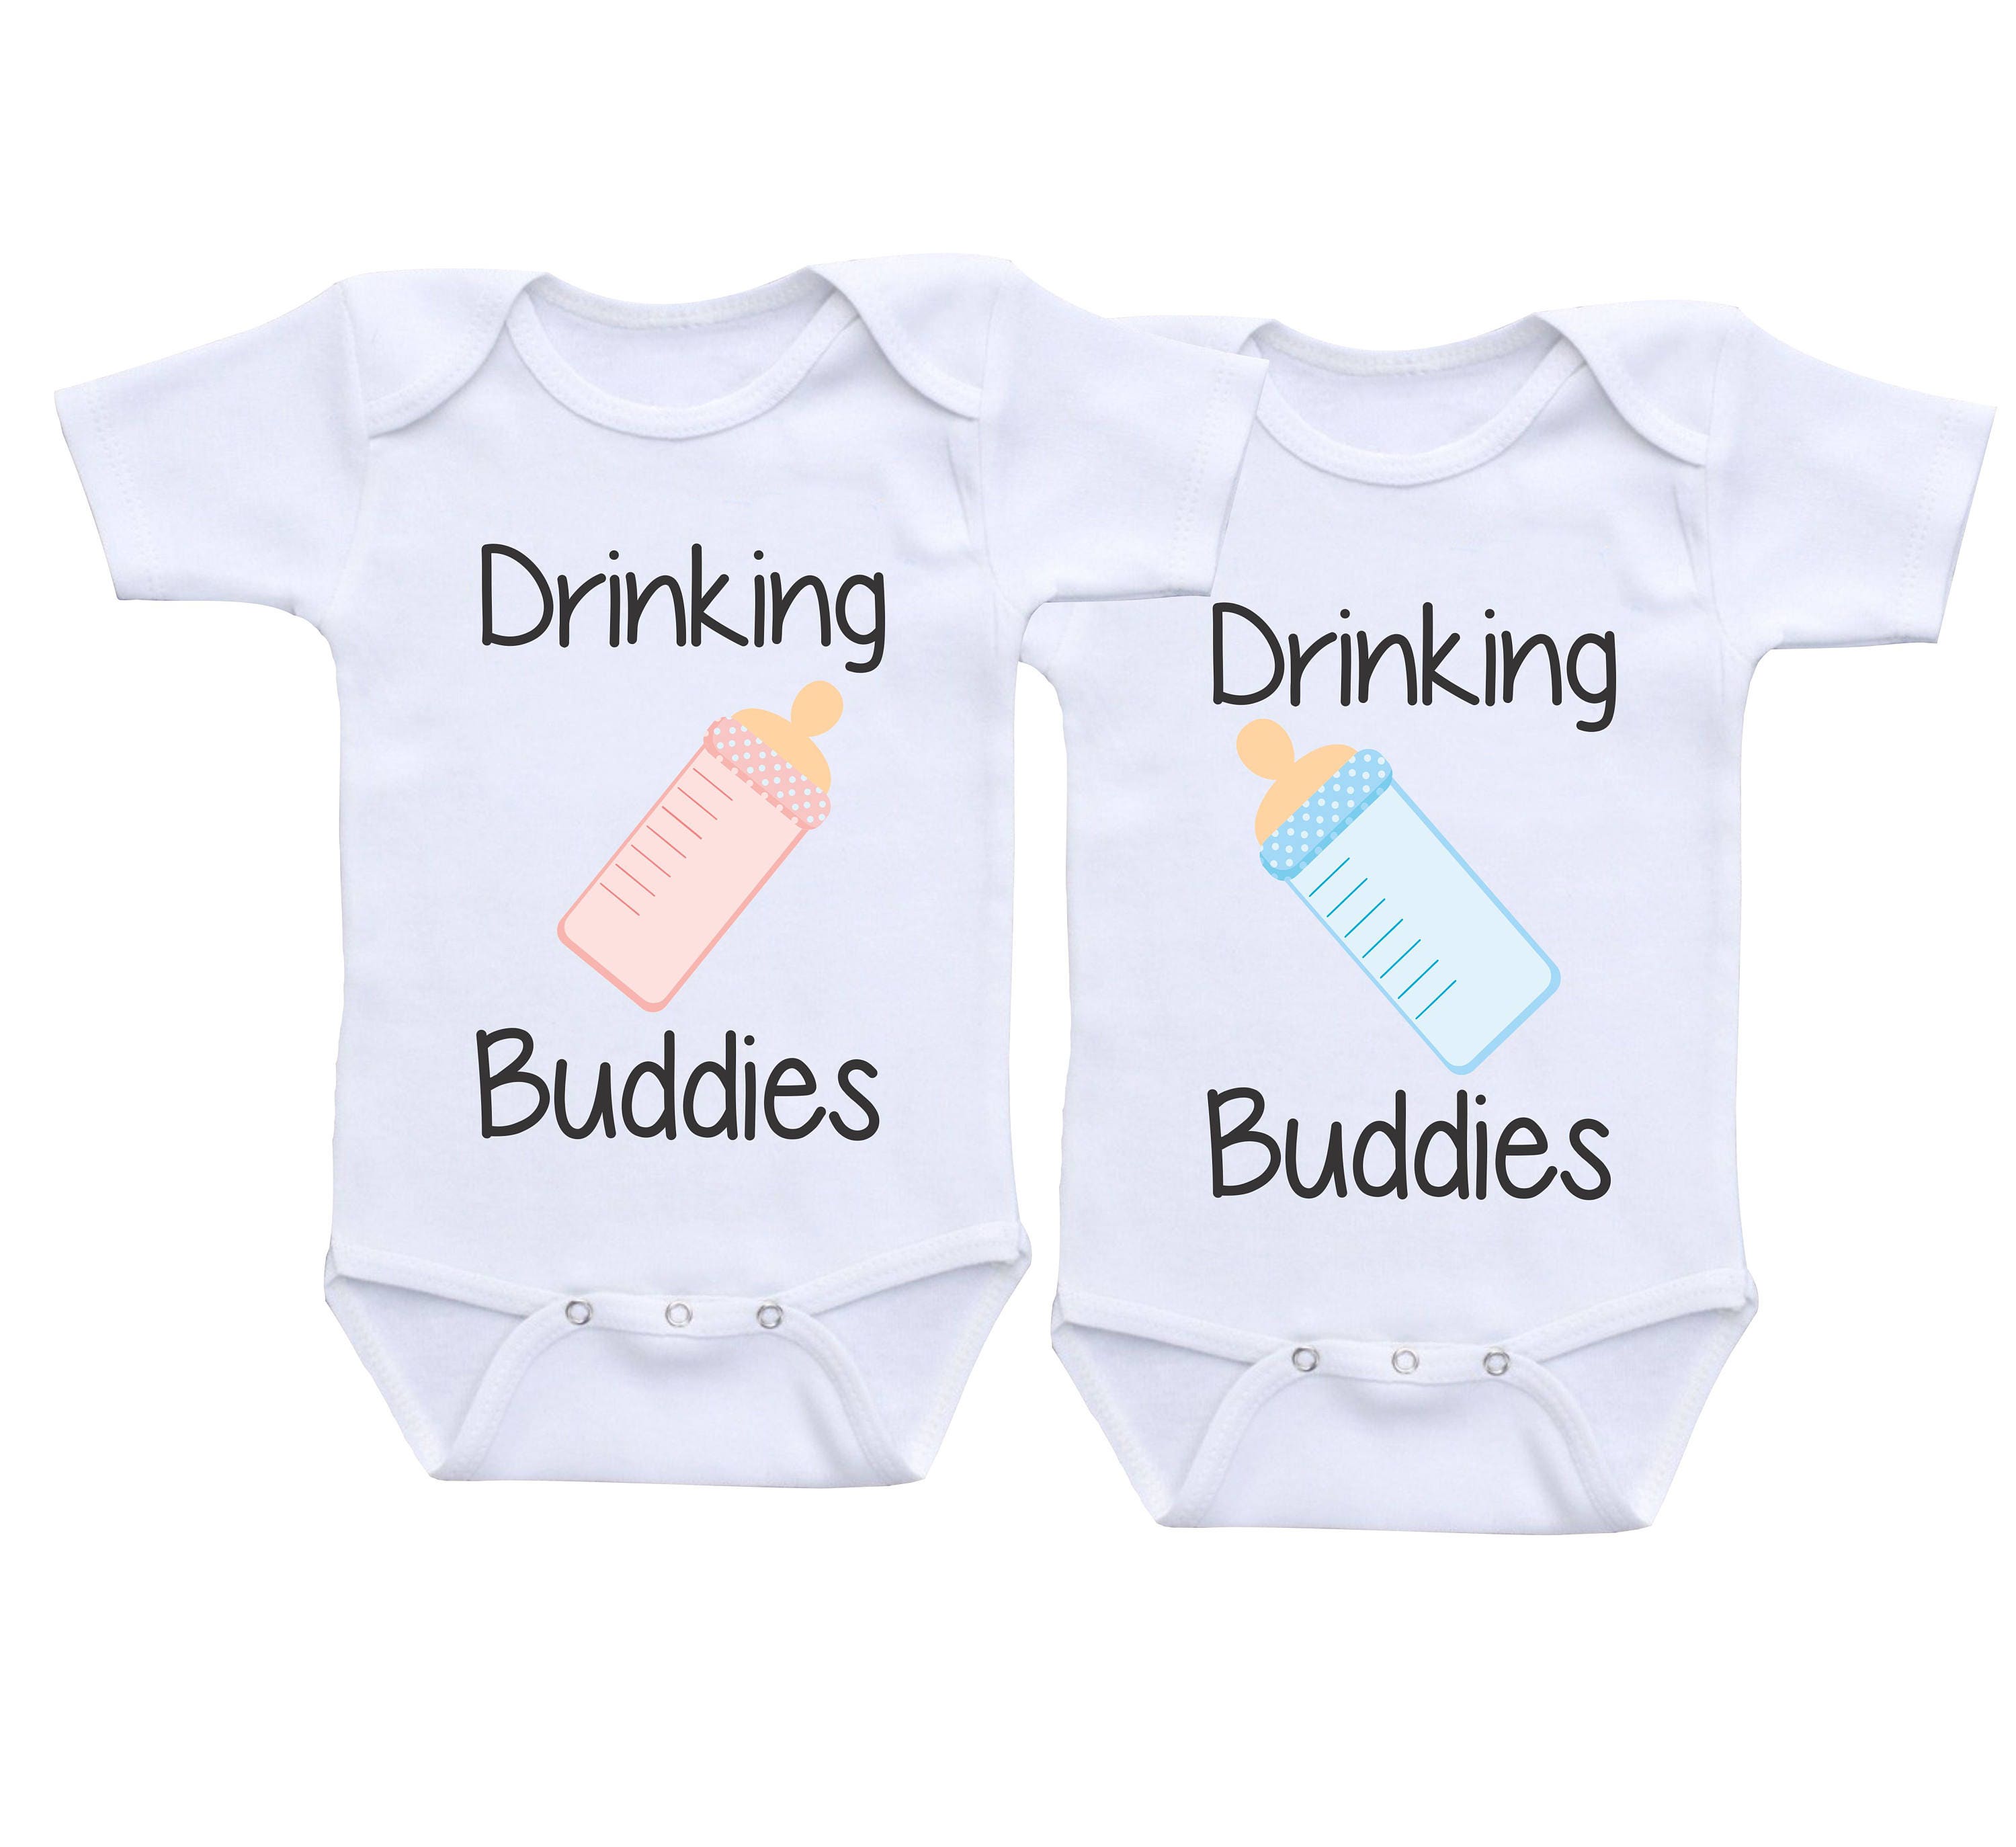 twins for girls twin mom gifts Twins Baby Shower Twins Outfits TWINS ONESIES Twins Baby Gifts Twin gifts twins bodysuits twins girls